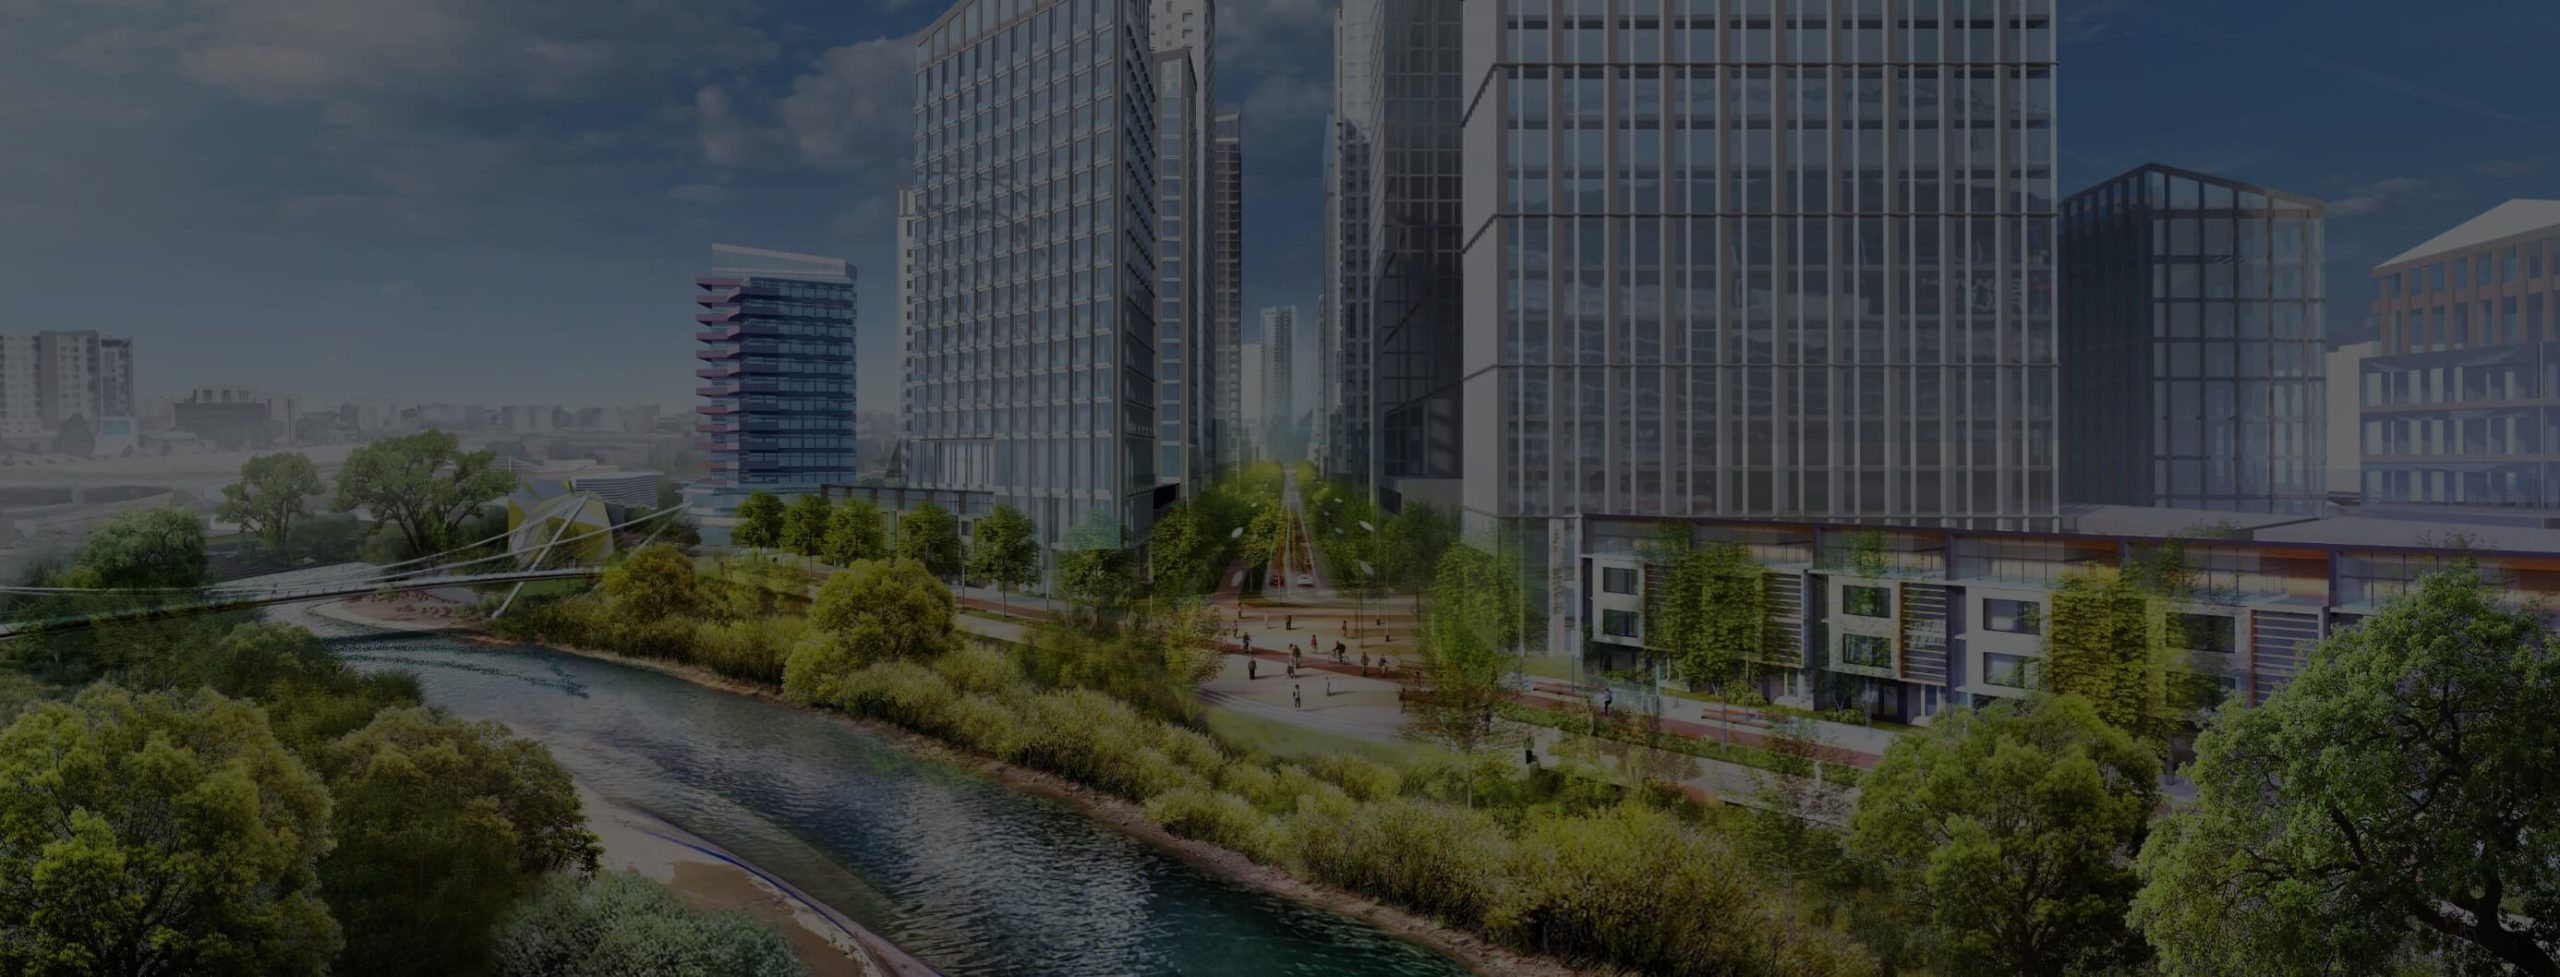 An artist's rendering of The River Mile in downtown Denver with trees and a river.